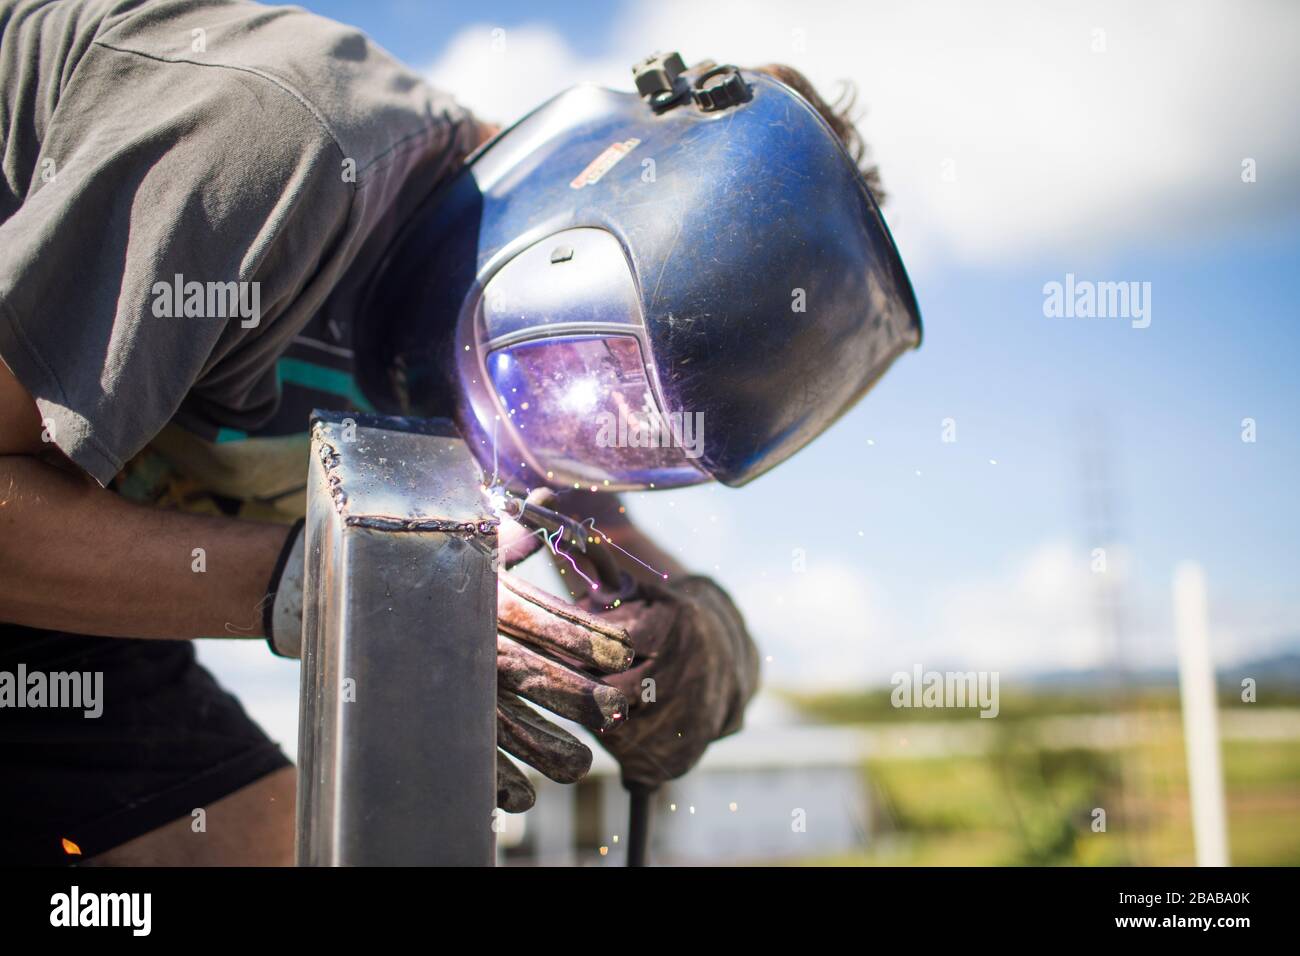 close up view of man welding outdoors on rooftop. Stock Photo